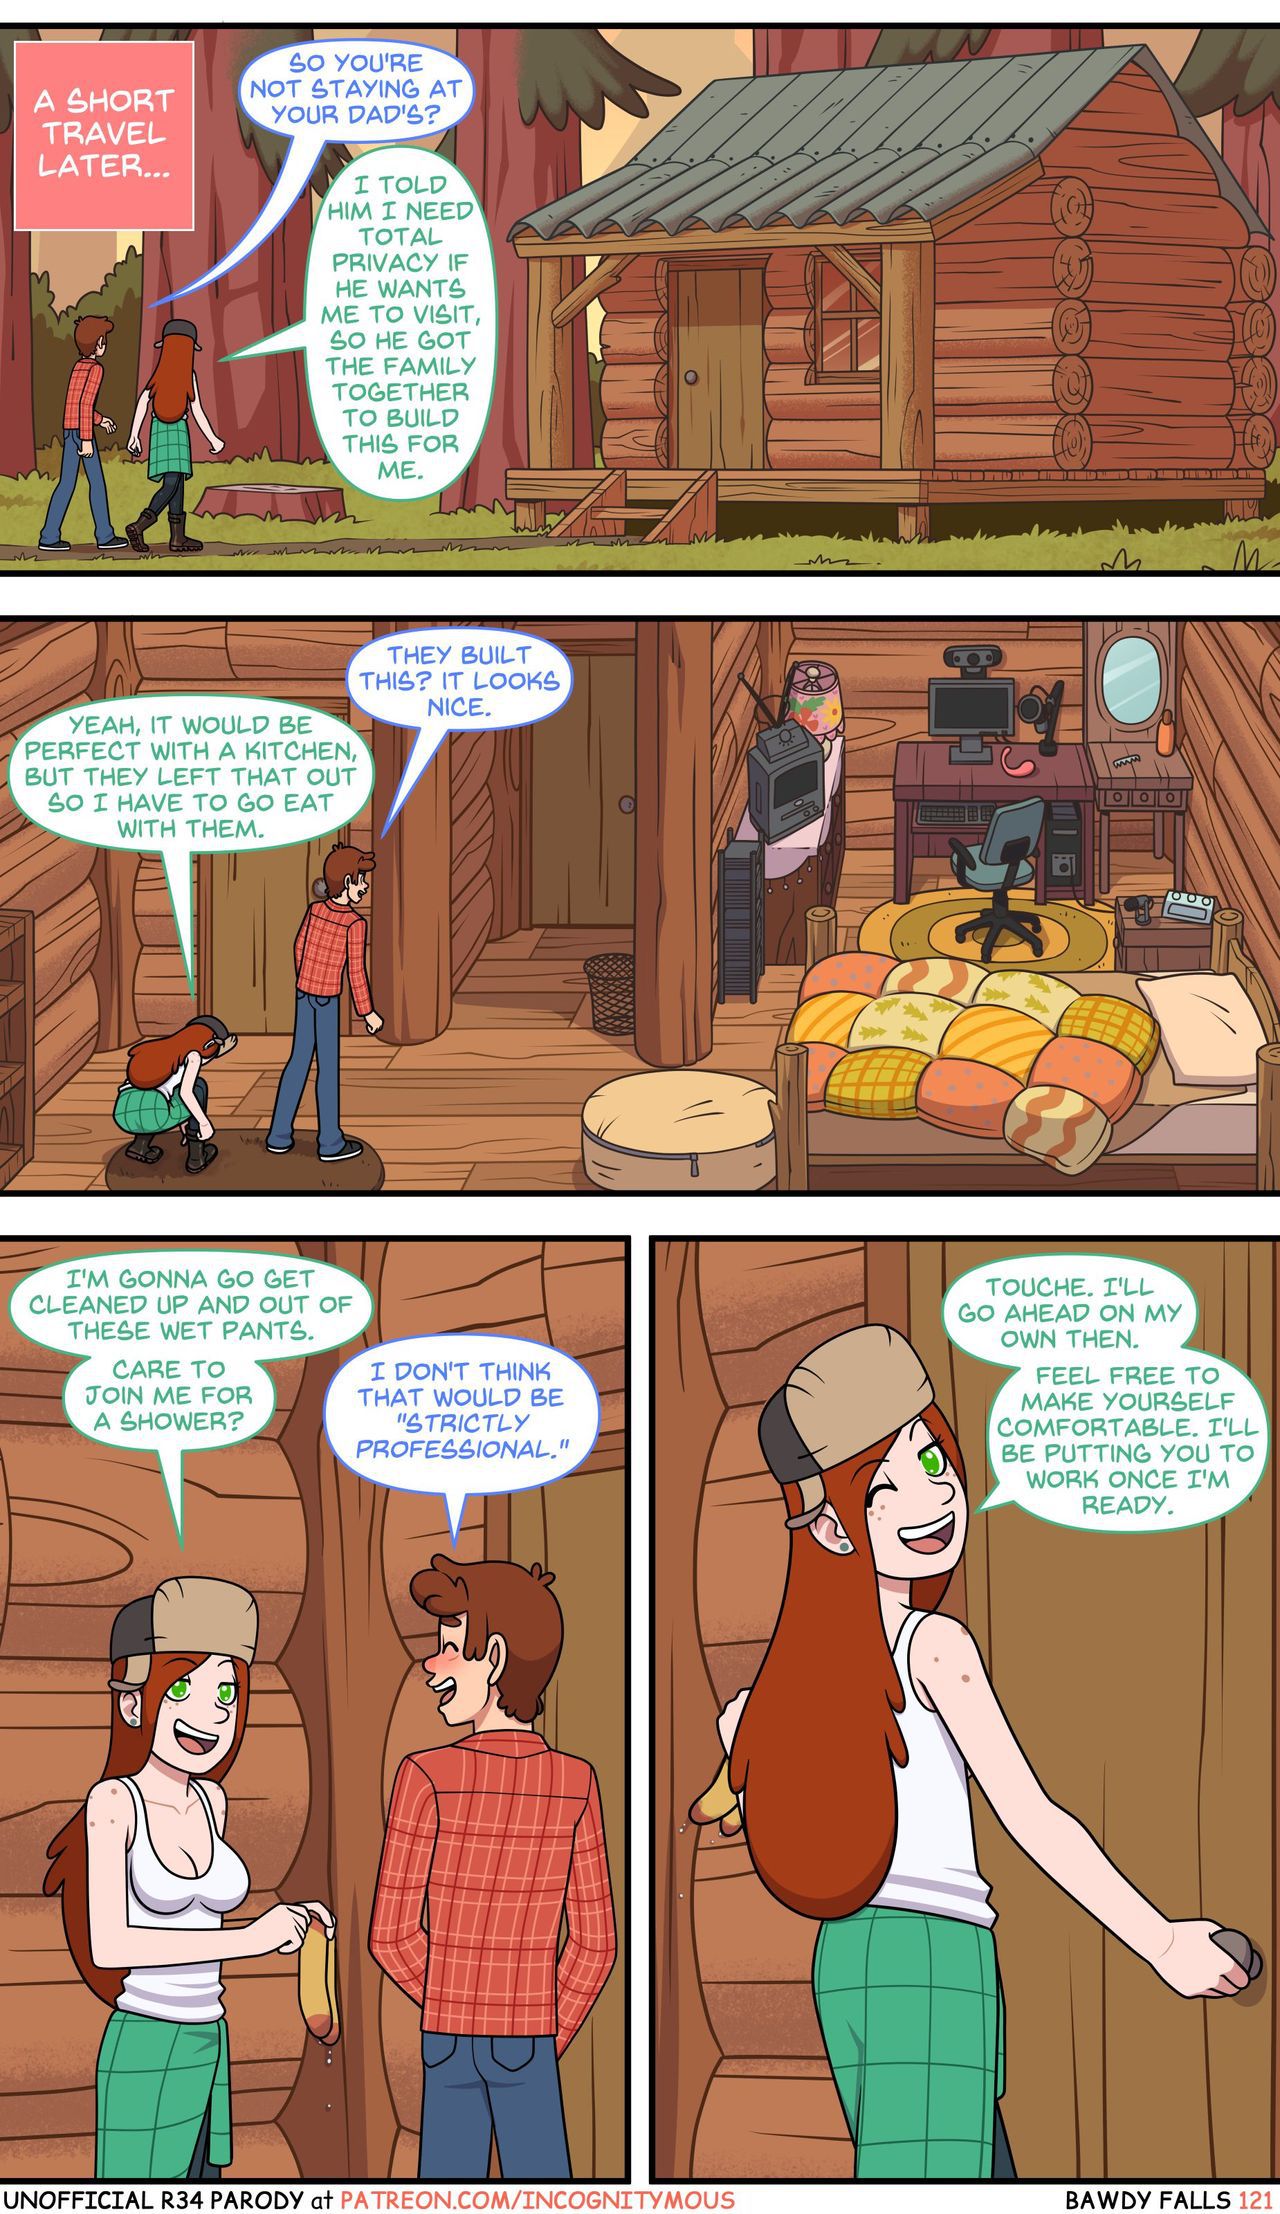 Bawdy Falls (Gravity Falls) [Incognitymous] - 3 - ongoing - english 1